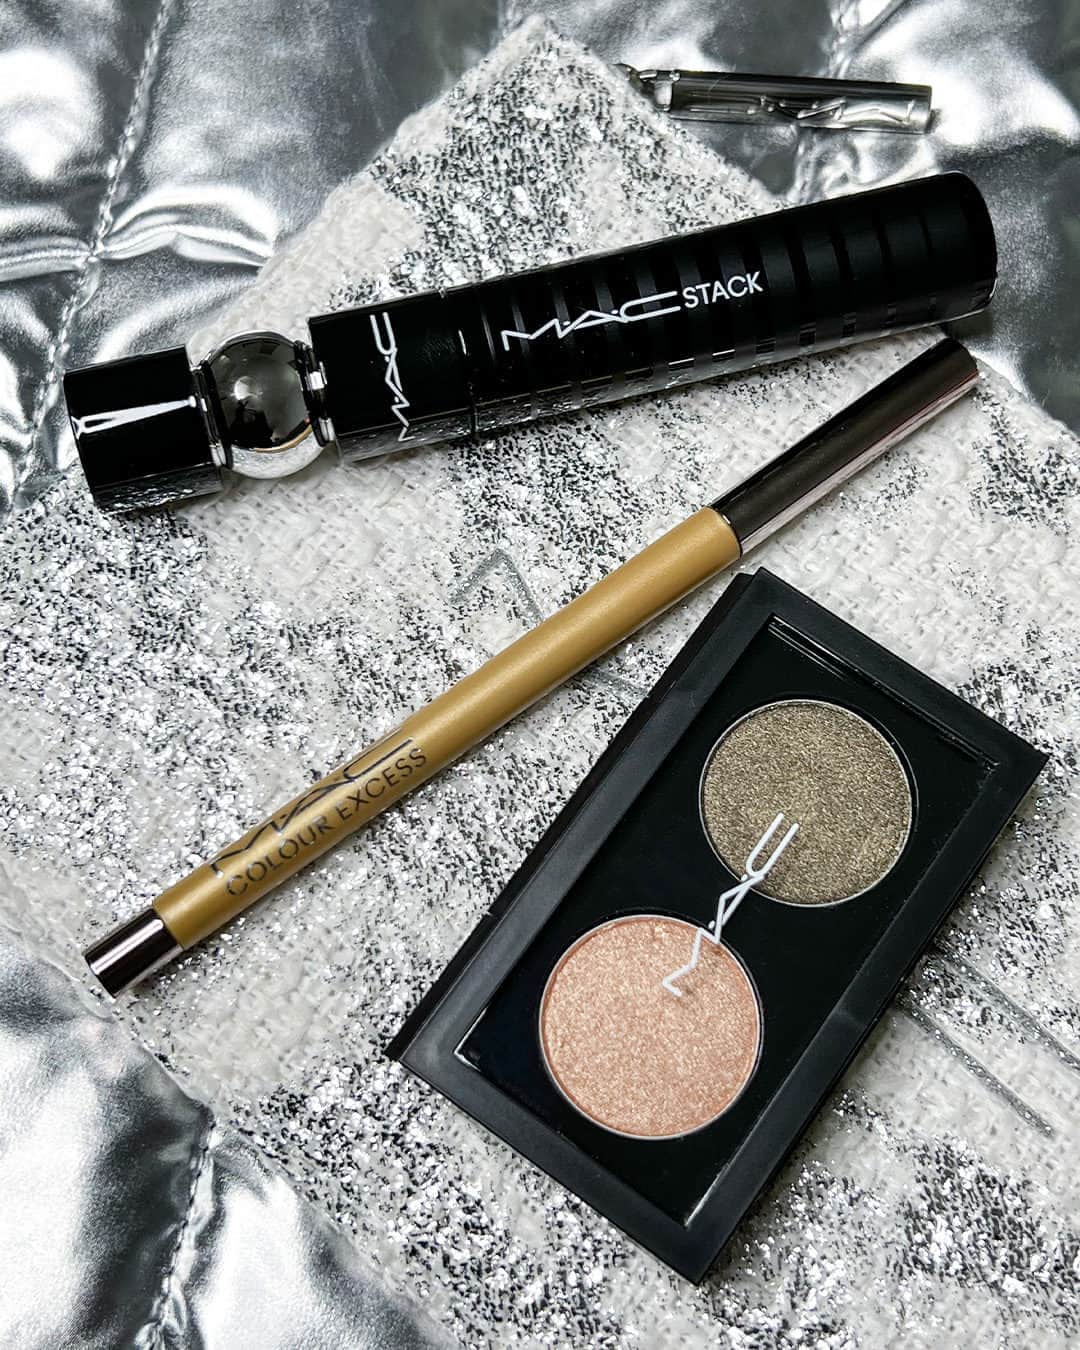 M·A·C Cosmetics UK & Irelandのインスタグラム：「BYOB - Bring Your Own Bubbly 🥂  The limited-edition Snowtrance Eye Kit is the perfect plus one for any festive occasion this season. Featuring an eyeshadow duo with two shades in a Frost texture, a bestselling M•A•CStack Mascara AND Colour Excess Gel Pencil Eyeliner. Worth £87, grab yours for £55!   Tap to shop NOW!  #MACCosmeticsUK #MACHoliday #MACBizarreBlizzard」